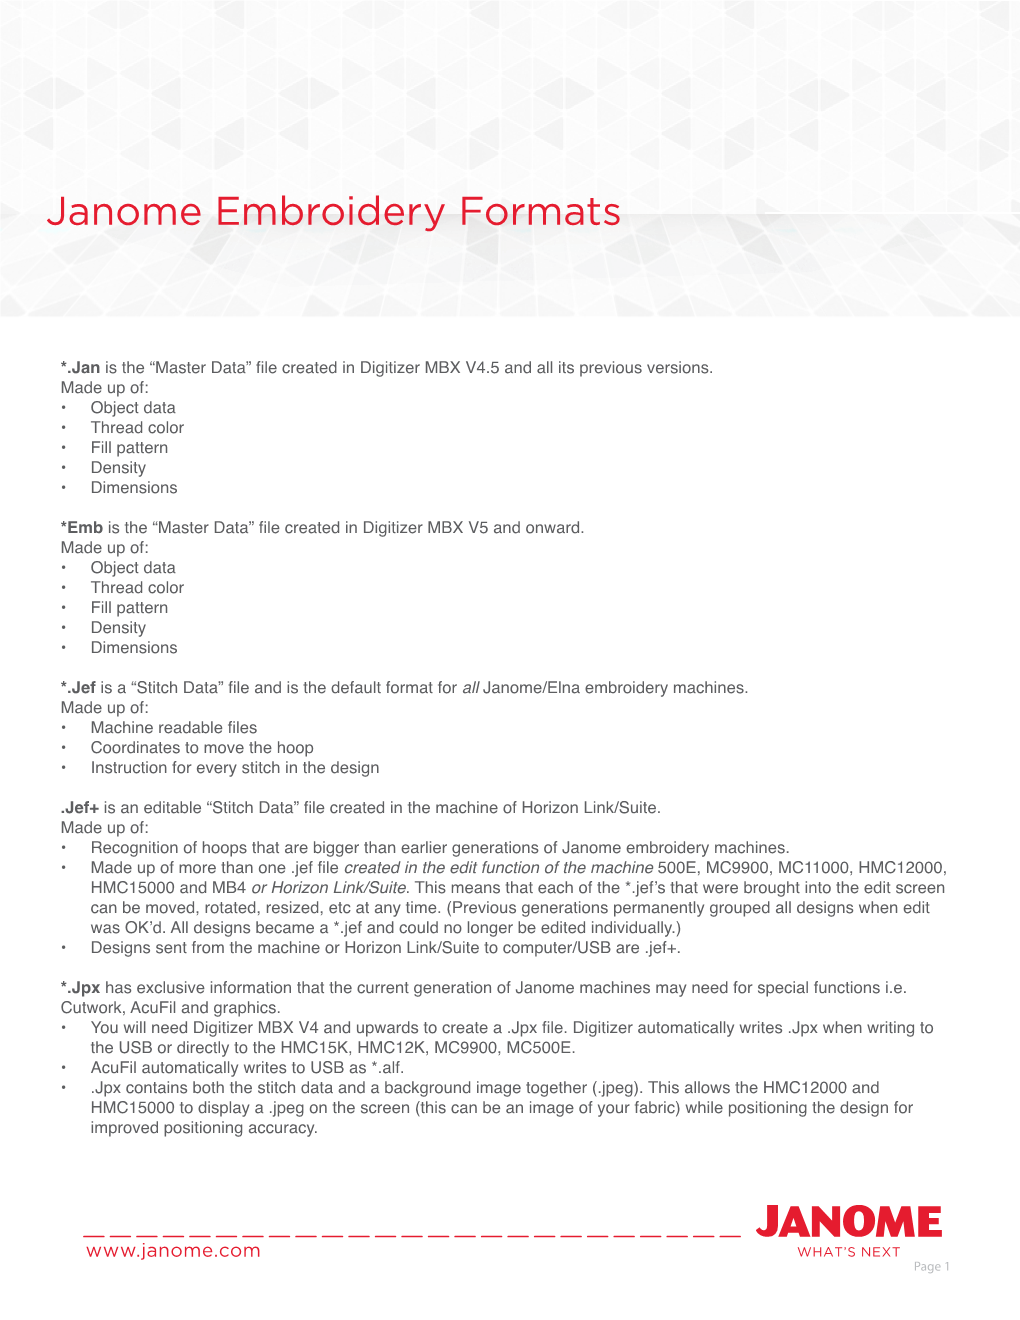 Janome Embroidery Formats